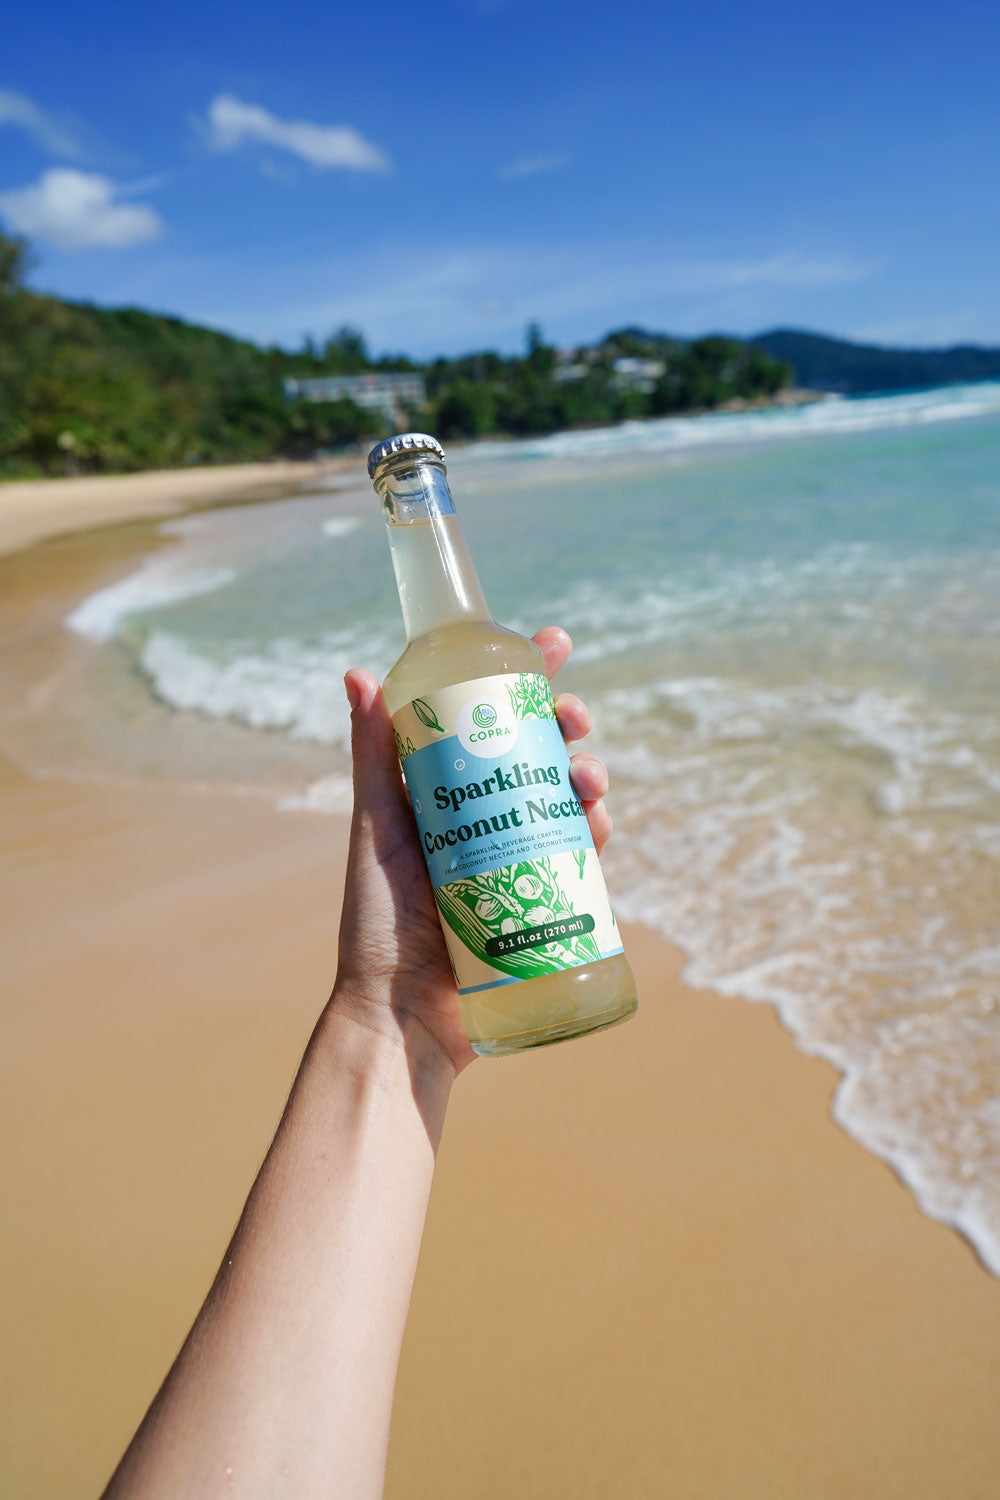 Copra Coconut Sparkling Coconut Nectar held up in front of a beautiful beach scene in Thailand.